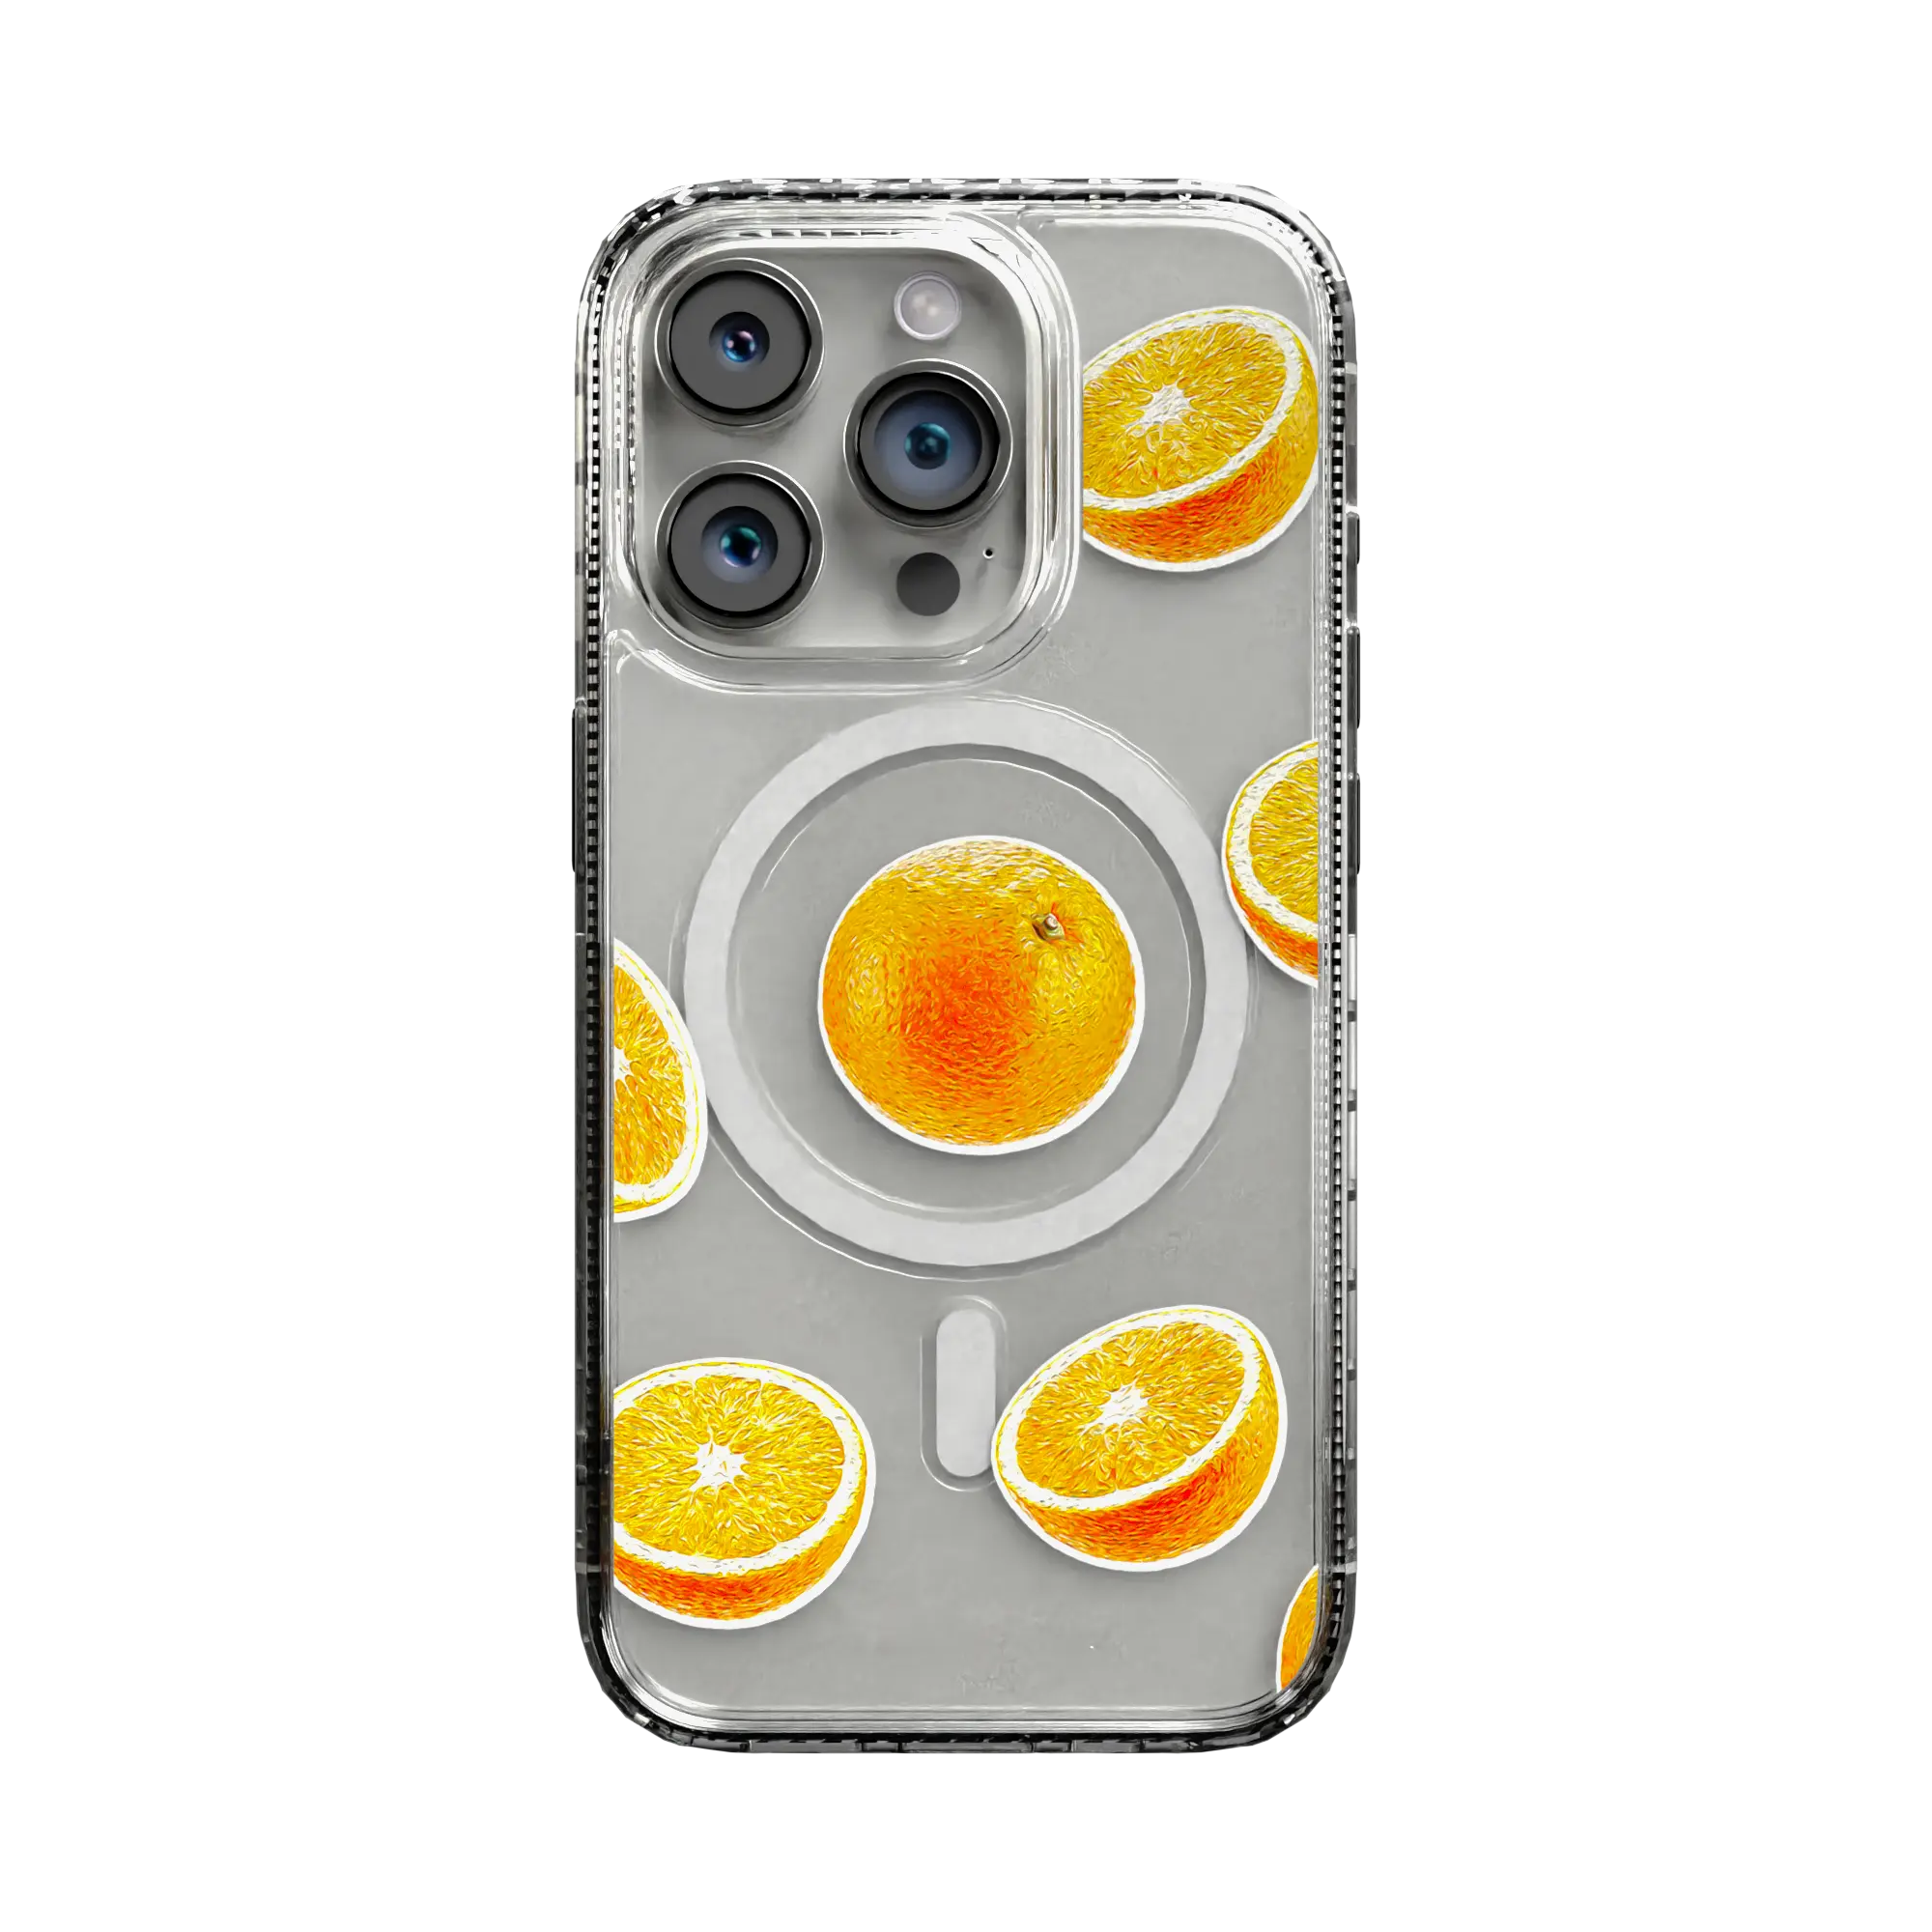 Apple-iPhone-15-Pro-Crystal-Clear Orange Zest | Protective MagSafe Case | Fruits Collection for Apple iPhone 15 Series cellhelmet cellhelmet